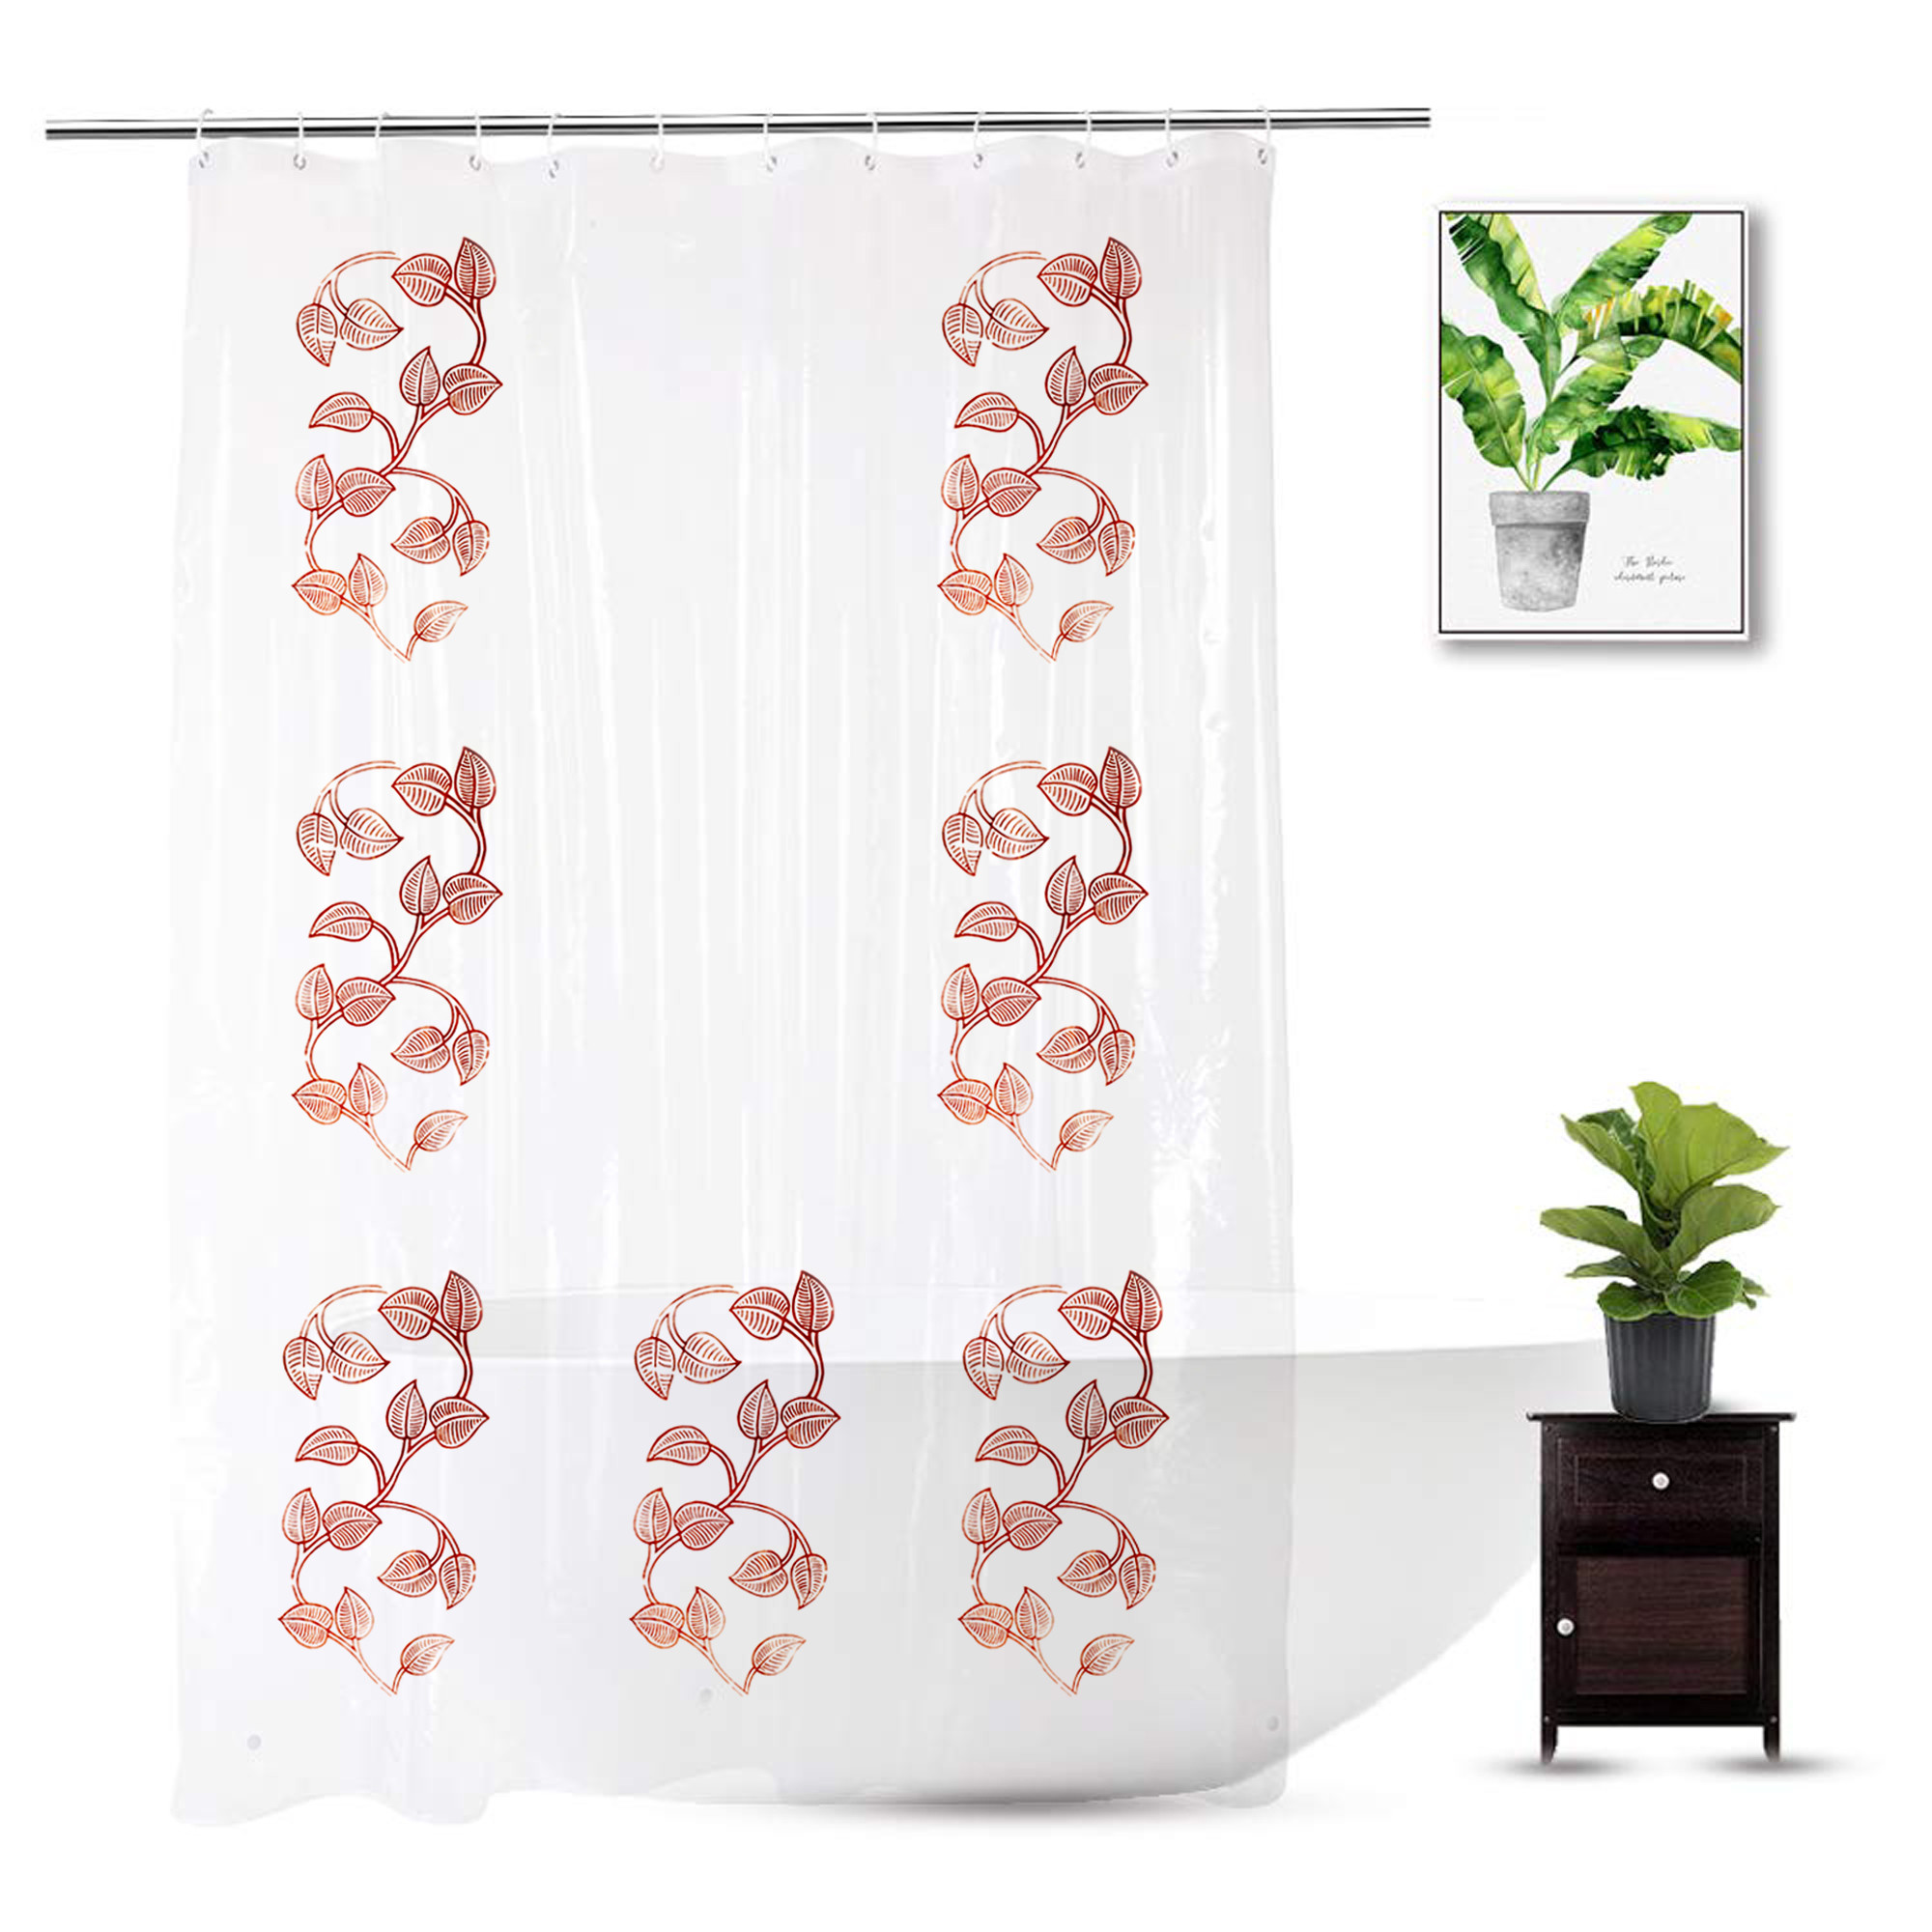 Kuber Industries 0.30mm Leaf Printed Stain Resistant, No Odor, Waterproof PVC AC/Shower Curtain With Hooks,7 Feet (Transparent)